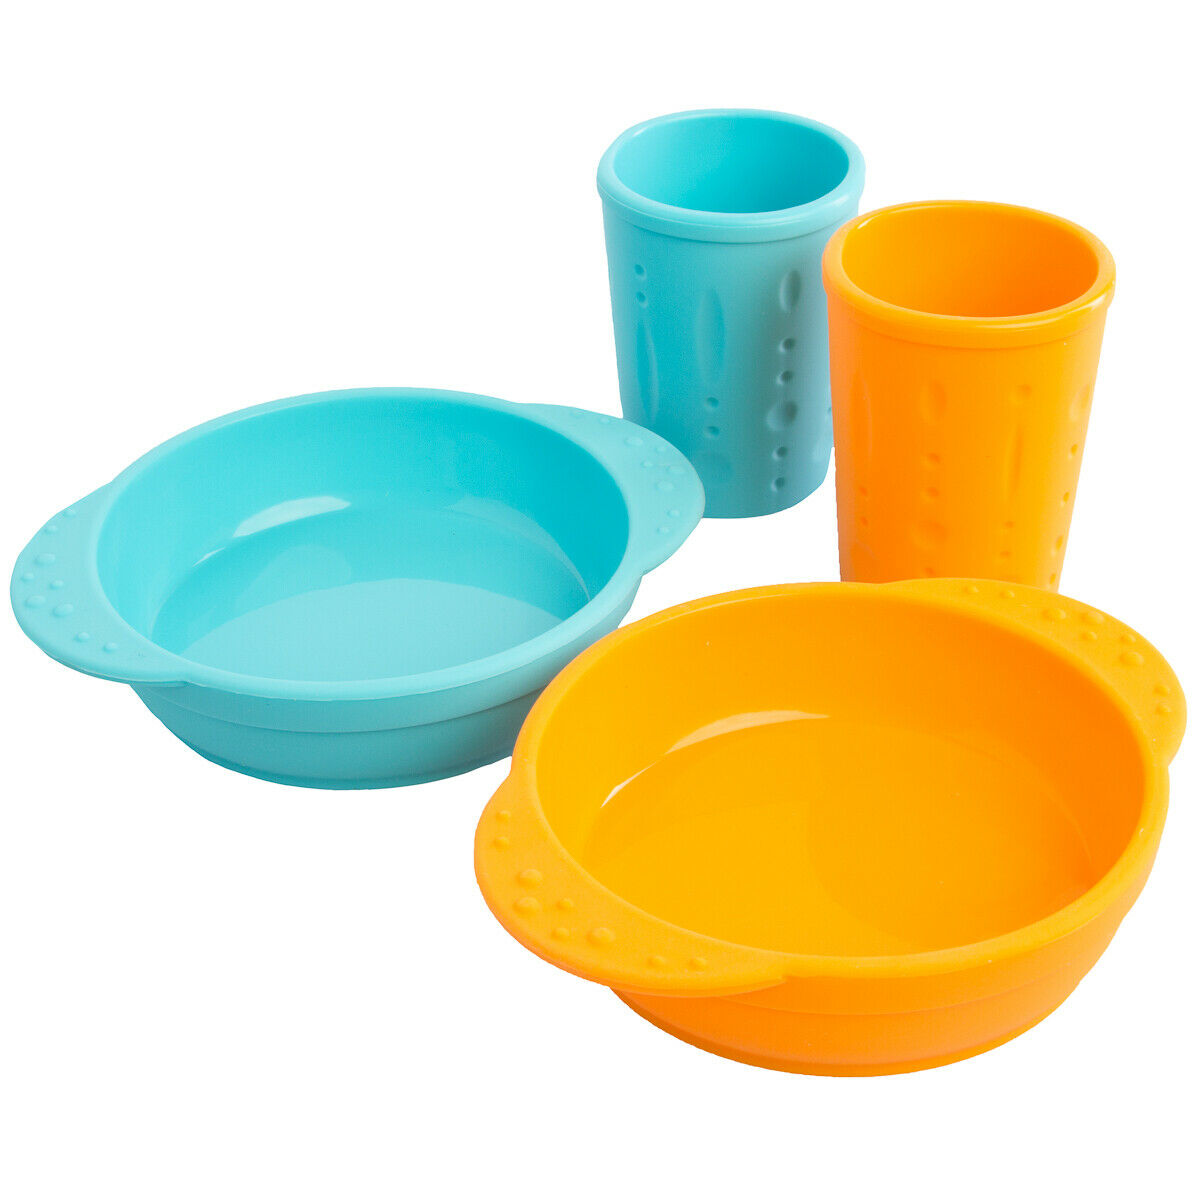 4pc Set Kinderville Silicone Kids Cups And Bowls For Toddlers Baby Bpa Free